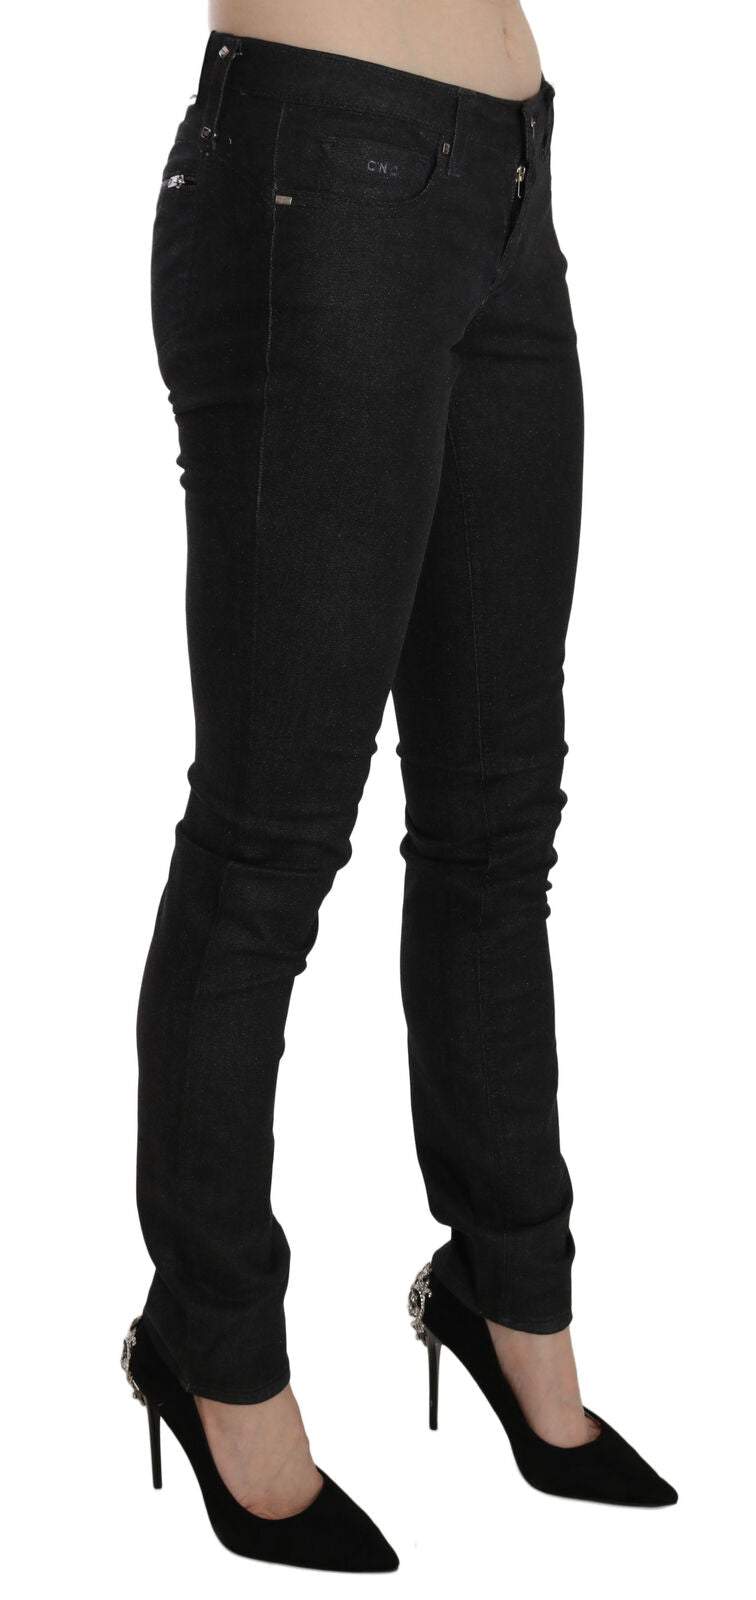 Costume National Black Low Waist Skinny Casual Denim Jeans Black, Costume National, feed-agegroup-adult, feed-color-Black, feed-gender-female, Jeans & Pants - Women - Clothing, W26, W30, W31 at SEYMAYKA